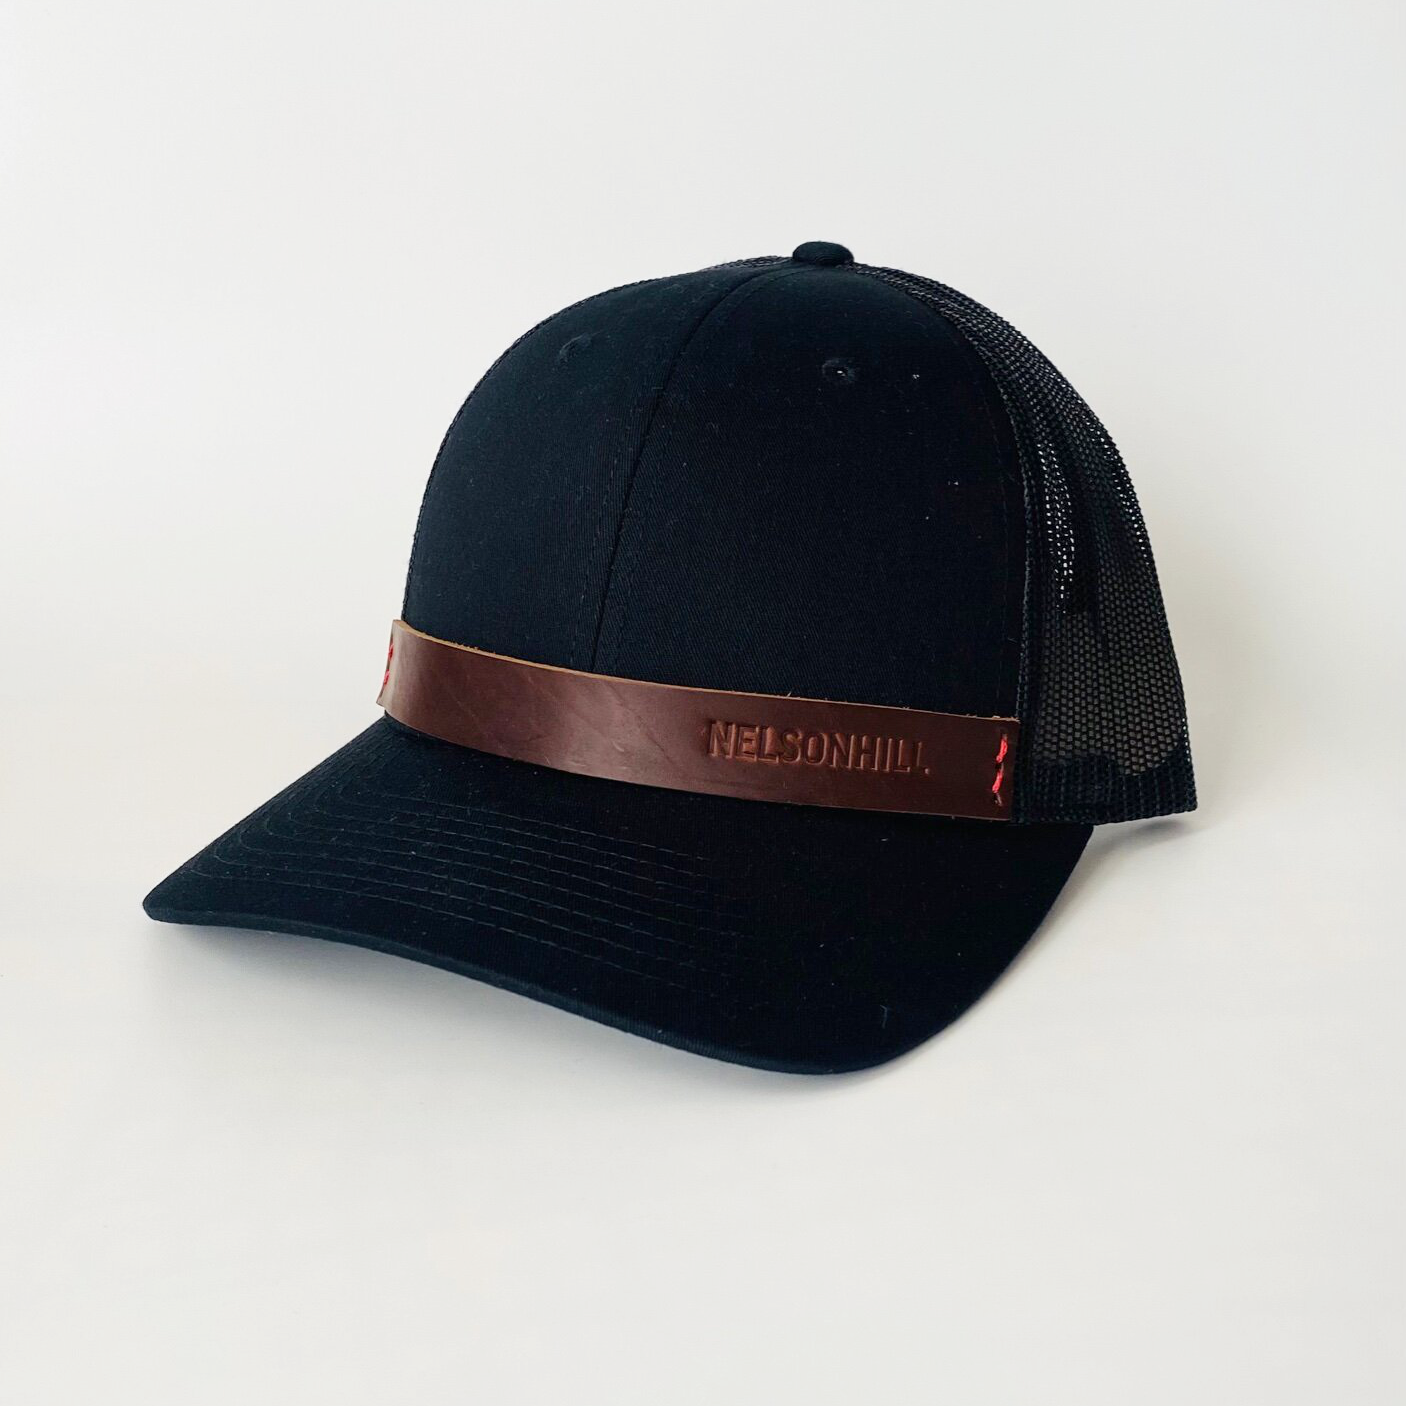 NH Leather Rope Hat – $40